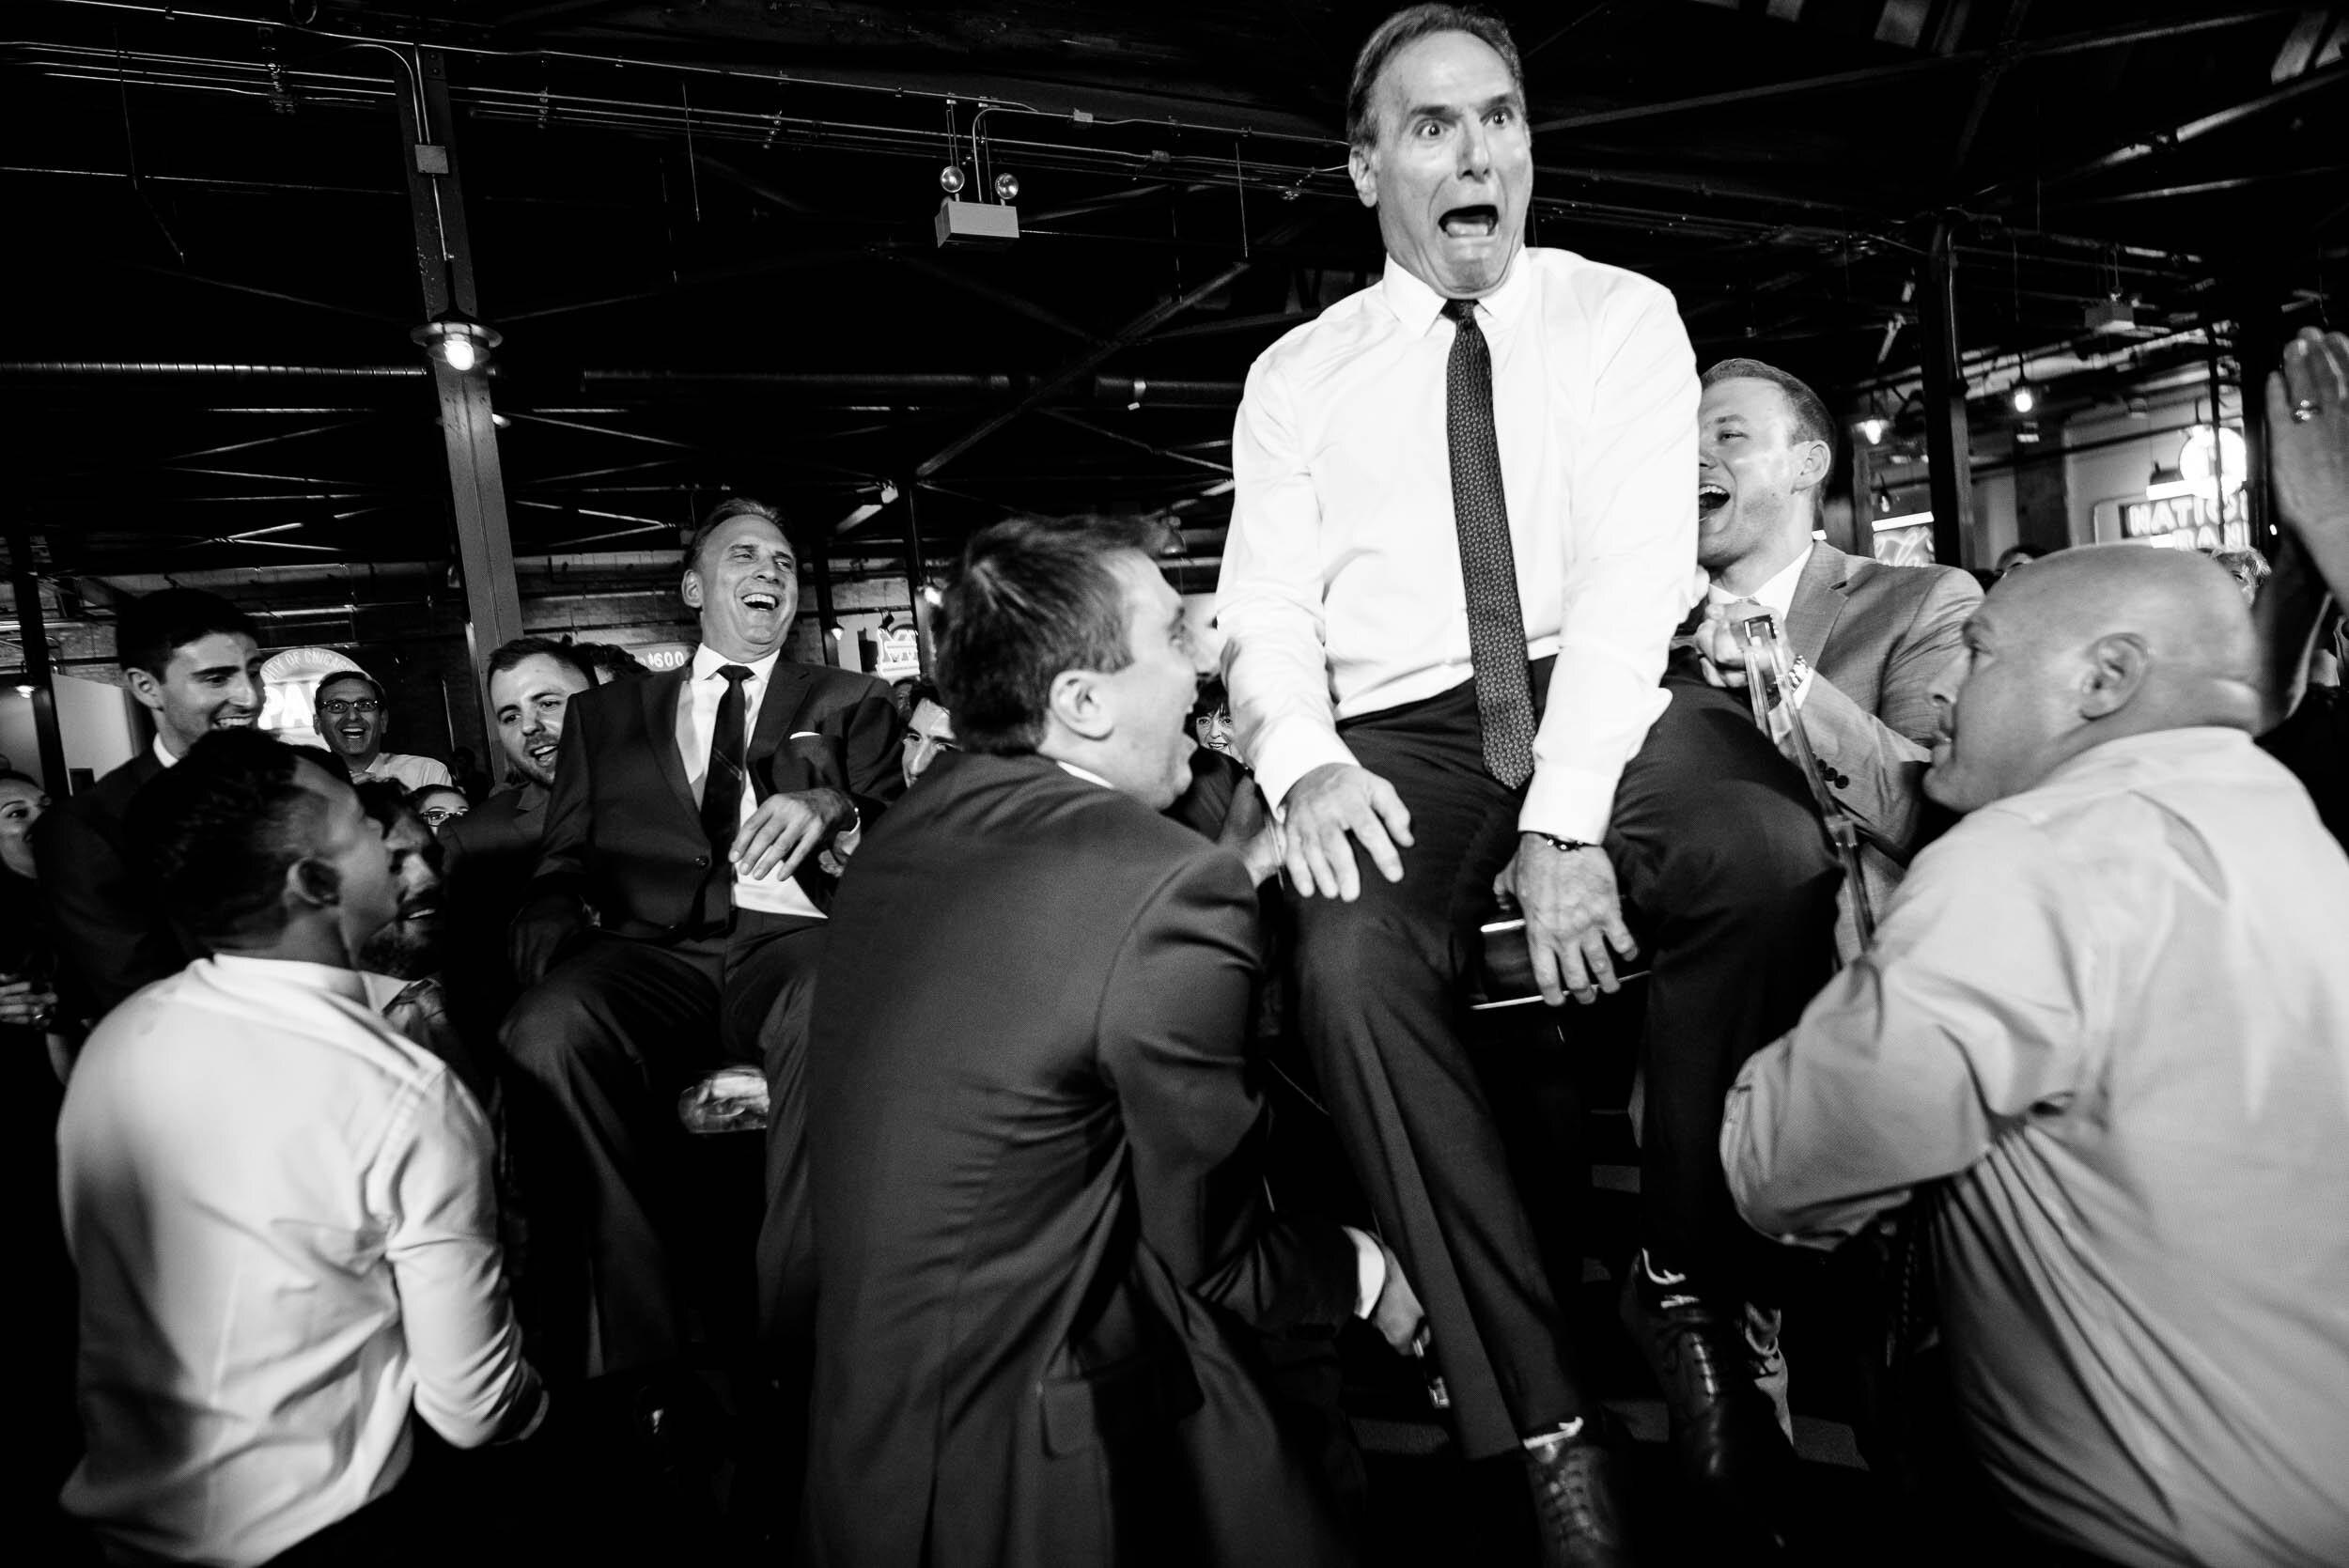 Fun photo of the dads during the horah: Ravenswood Event Center Chicago wedding captured by J. Brown Photography.  